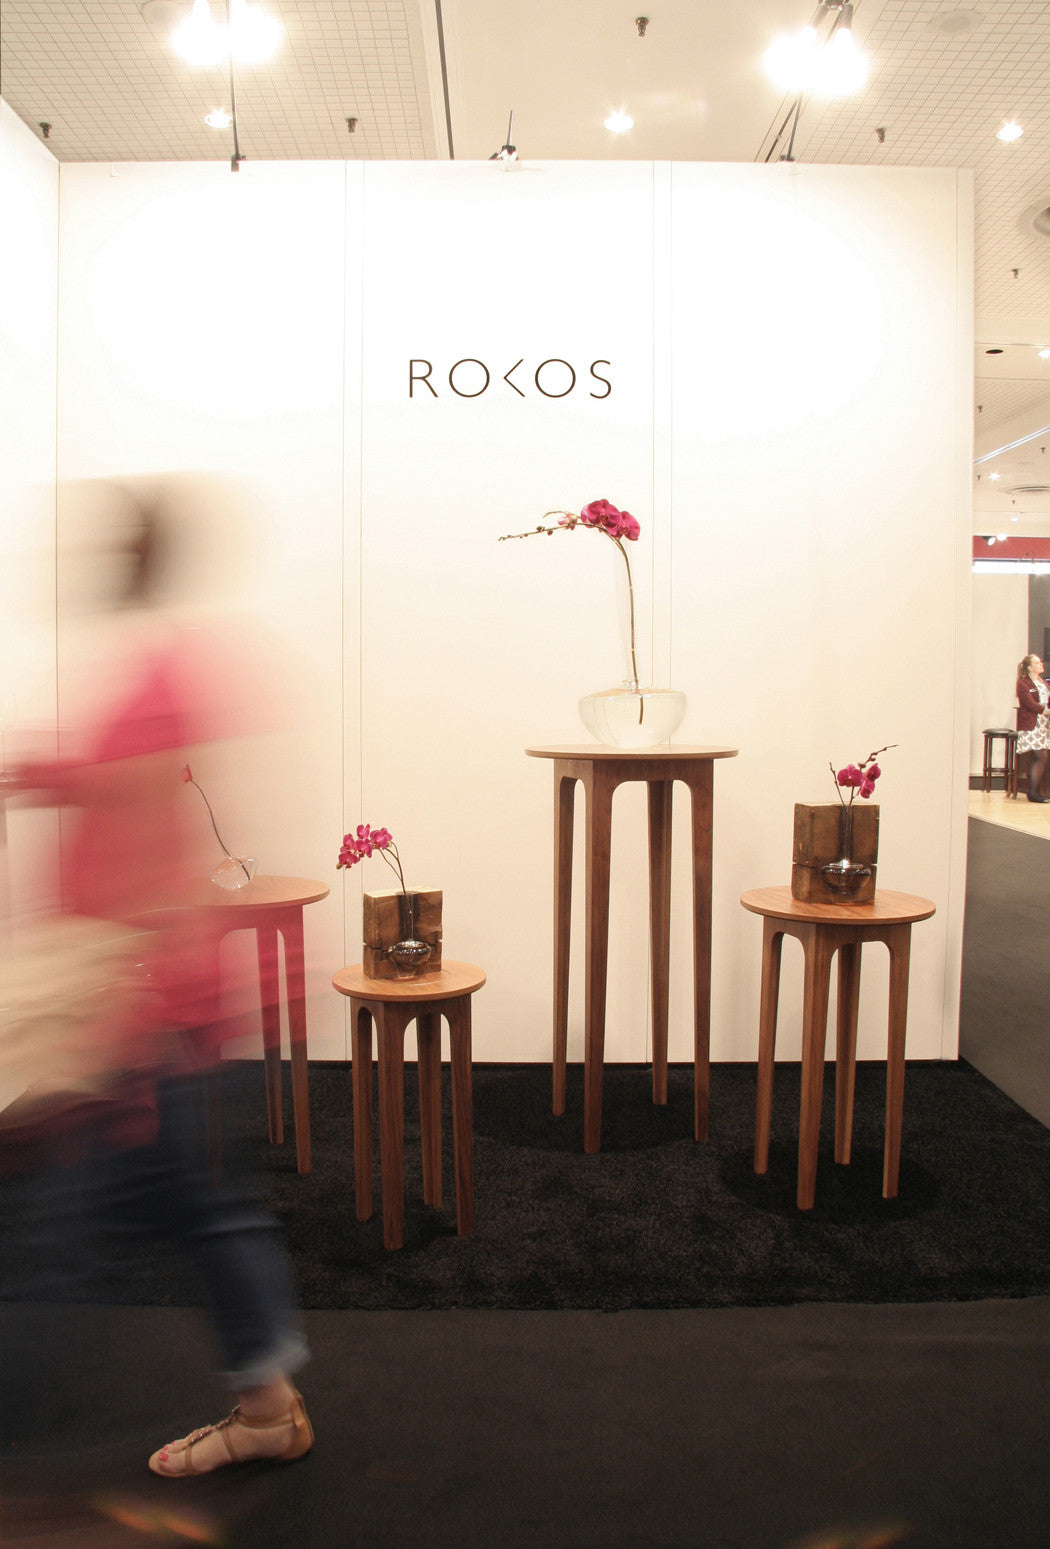 ROKOS at the ICFF in New York